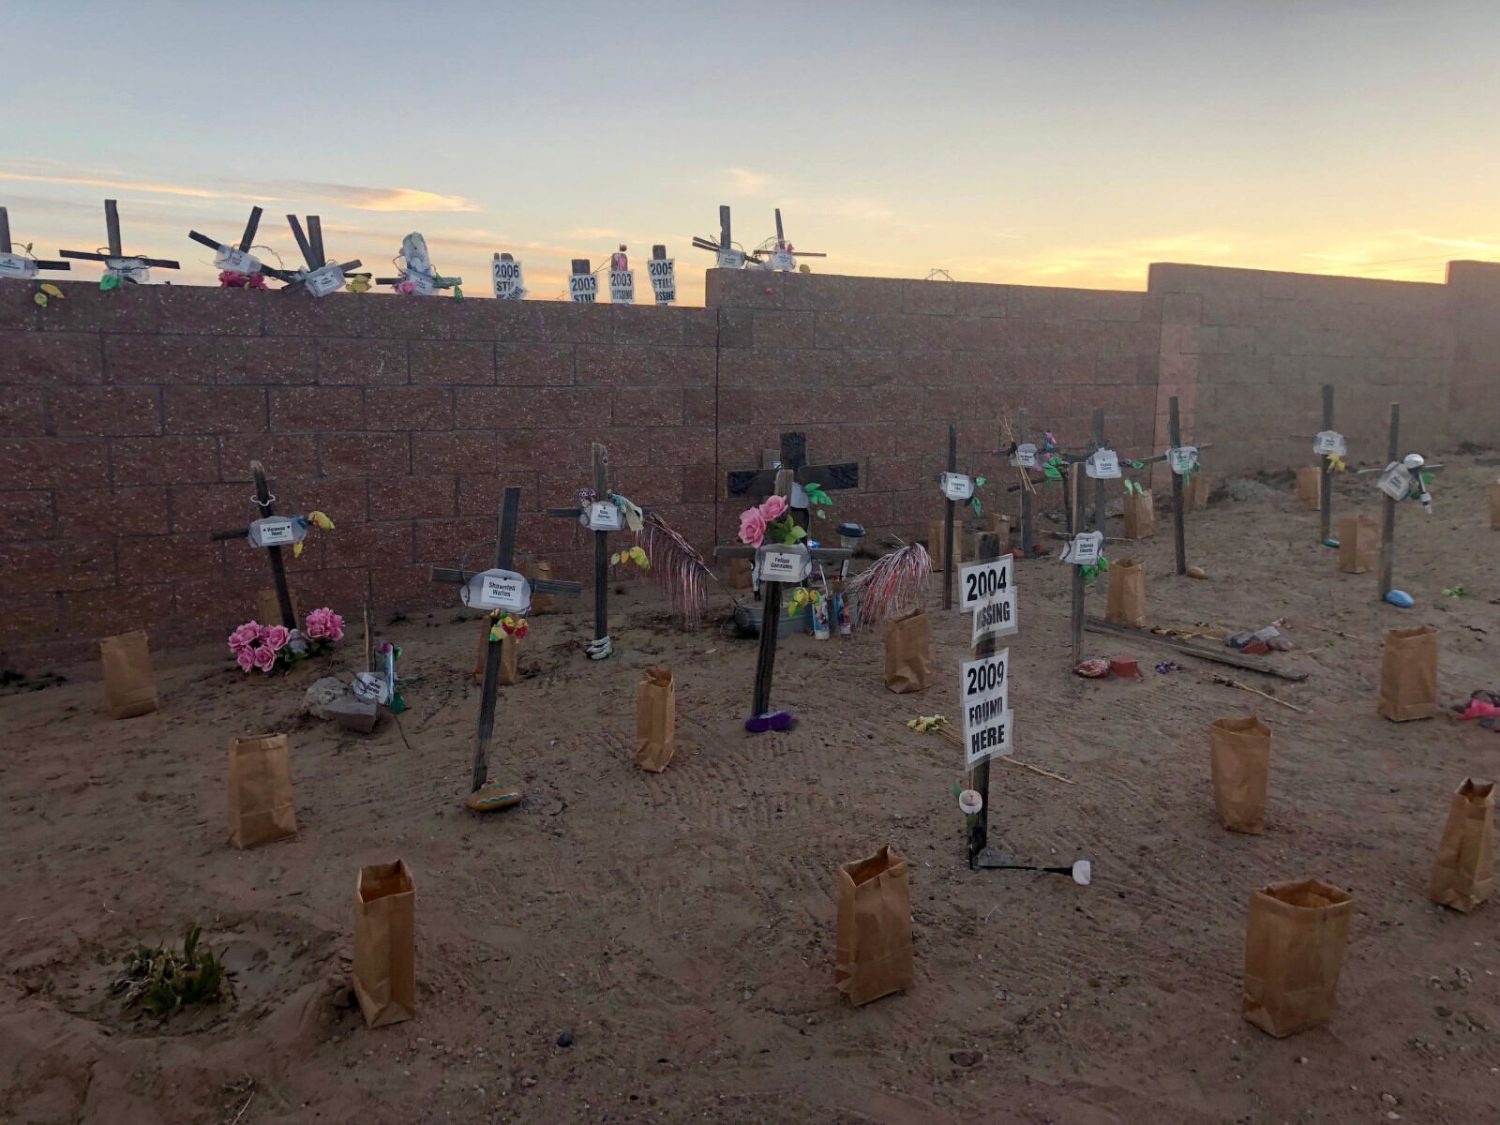 Terrifying West Mesa Murders: 11 Victims, Serial Killer Still On The Loose